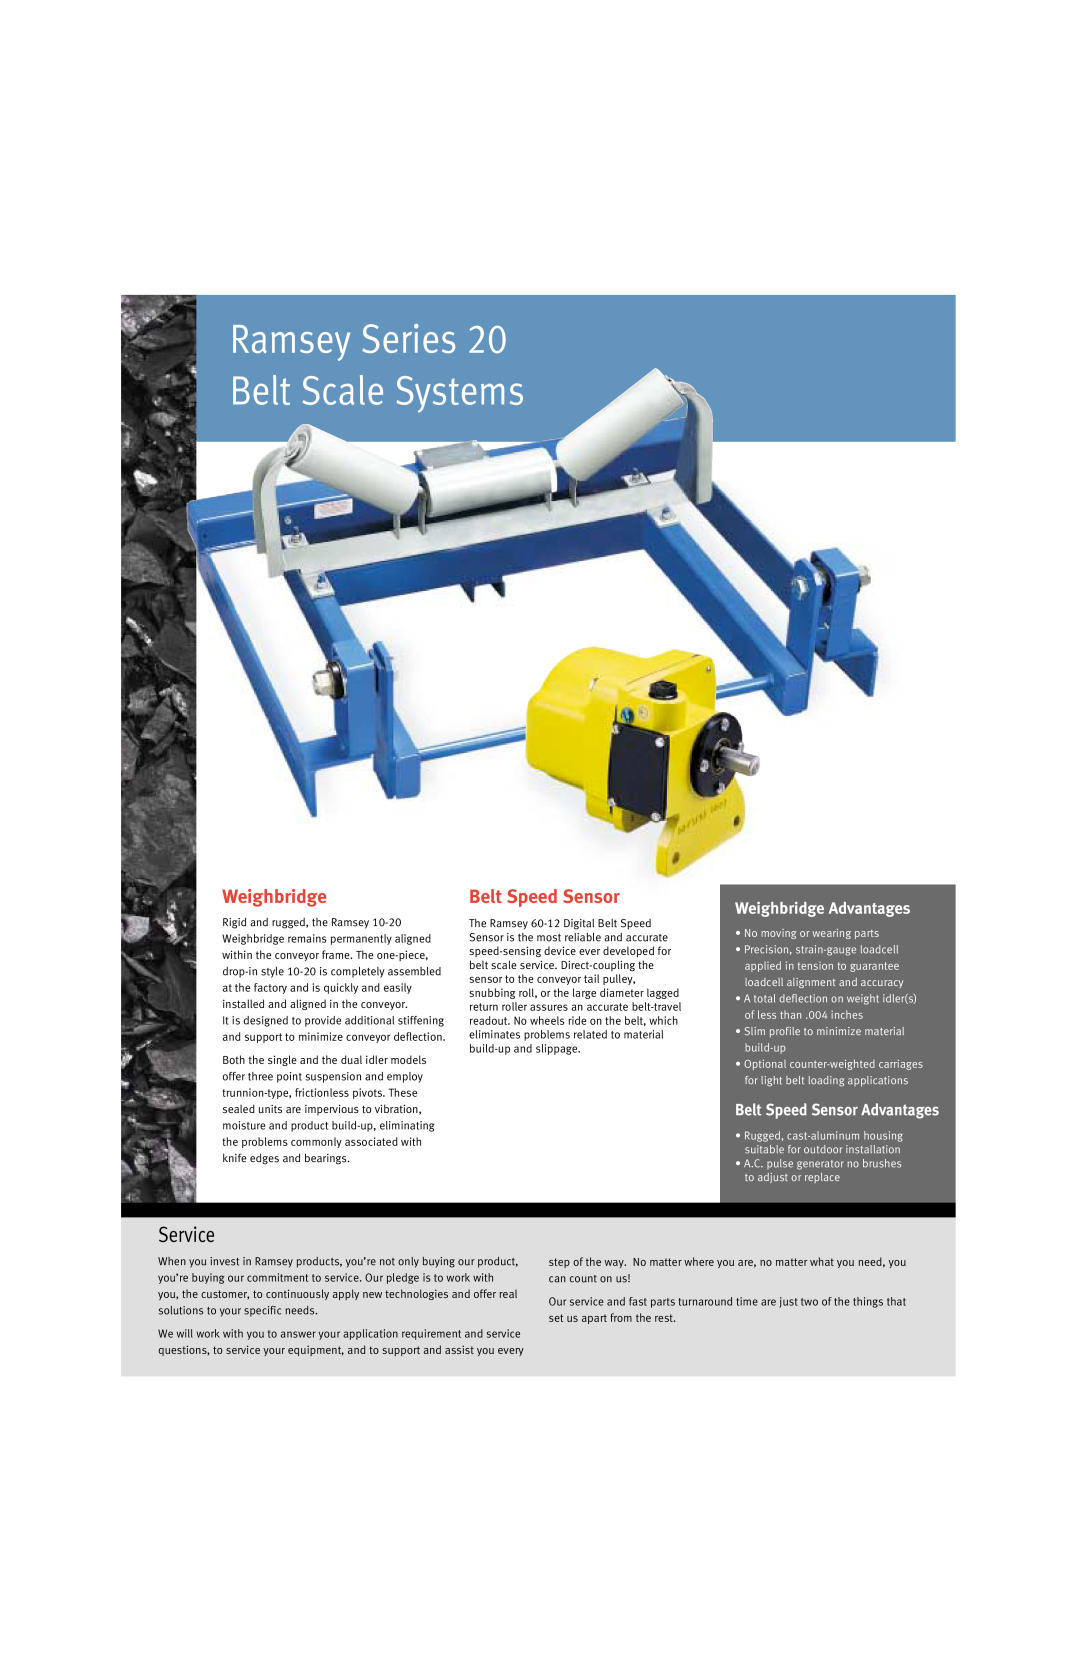 Thermo Products 20 Series Ramsey Series 20 Belt Scale Systems, Belt Speed Sensor, Weighbridge Advantages, Service 